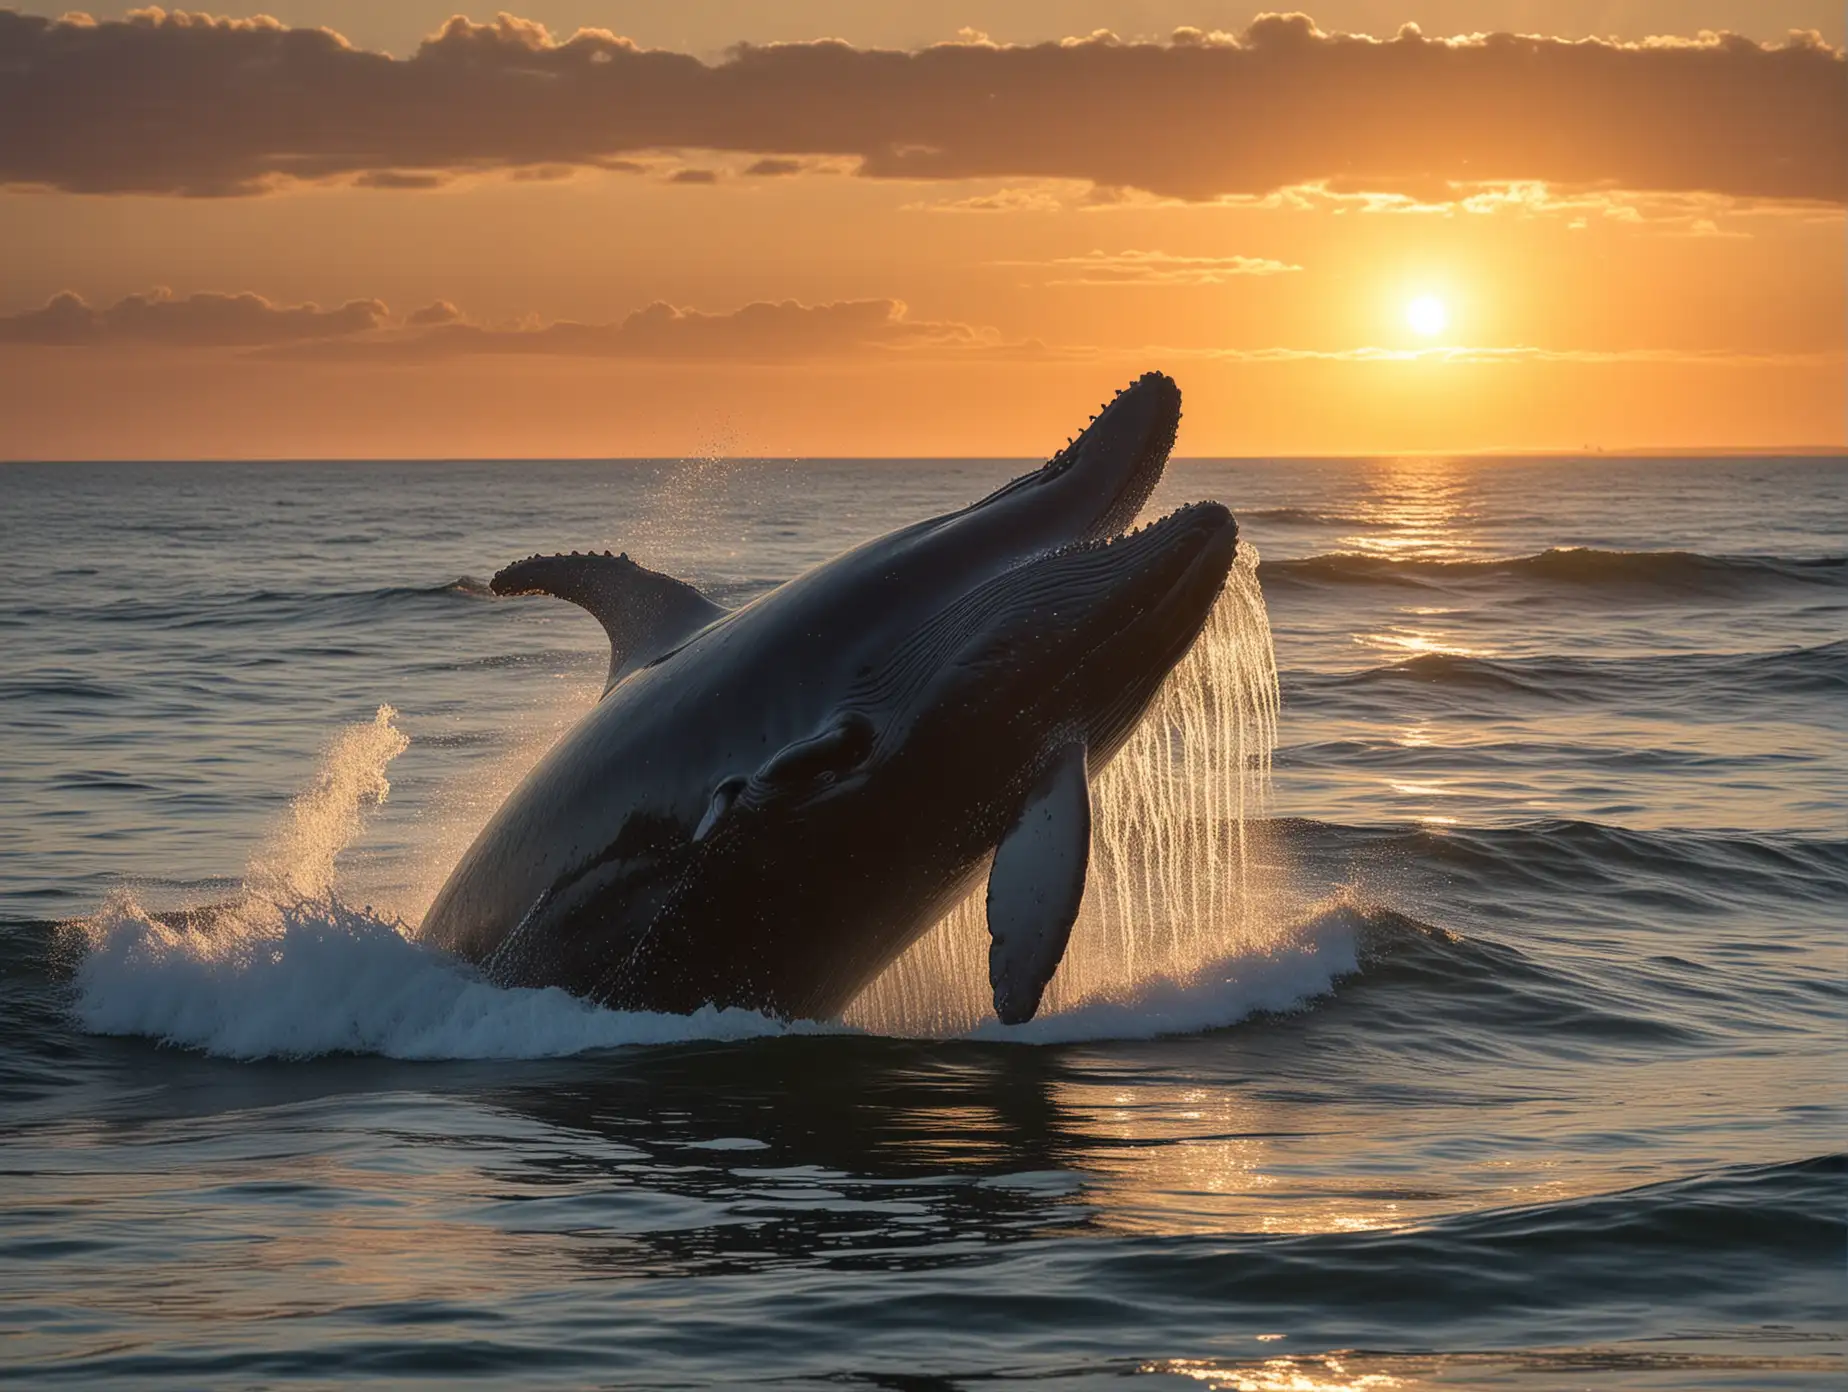 As the morning sun peeked over the horizon, casting its golden rays across the vast expanse of the ocean, the world seemed to awaken with a sense of wonder and awe. The surface of the water glimmered like a sheet of liquid gold, mirroring the brilliance of the celestial orb above.

In this breathtaking seascape, a majestic humpback whale emerged from the depths, breaking through the surface with an effortless grace. Its colossal body arced gracefully into the air, a symphony of droplets cascading in its wake, catching the first light of dawn like a shower of diamonds.

As the whale soared high above the waves, time seemed to stand still, capturing the moment in a tableau of sheer beauty. The gentle curve of its massive body contrasted against the vast expanse of the ocean, creating a stunning juxtaposition of scale and serenity.

Beneath the whale's majestic leap, a pod of dolphins danced in the waves, their sleek forms weaving through the water with playful abandon. Their joyful squeals echoed across the ocean, a chorus of jubilation that harmonized with the rhythm of the waves.

In the distance, a flock of seabirds took flight, their graceful silhouettes silhouetted against the backdrop of the rising sun. With wings outstretched, they soared effortlessly on the gentle breeze, their cries mingling with the symphony of the sea.

As the whale began its descent back into the embrace of the ocean, a sense of tranquility washed over the scene, enveloping everything in a cloak of peace and wonder. And in that fleeting moment, as the sun illuminated the beauty of the natural world, all who witnessed it were reminded of the profound majesty that lies beneath the surface of the sea.